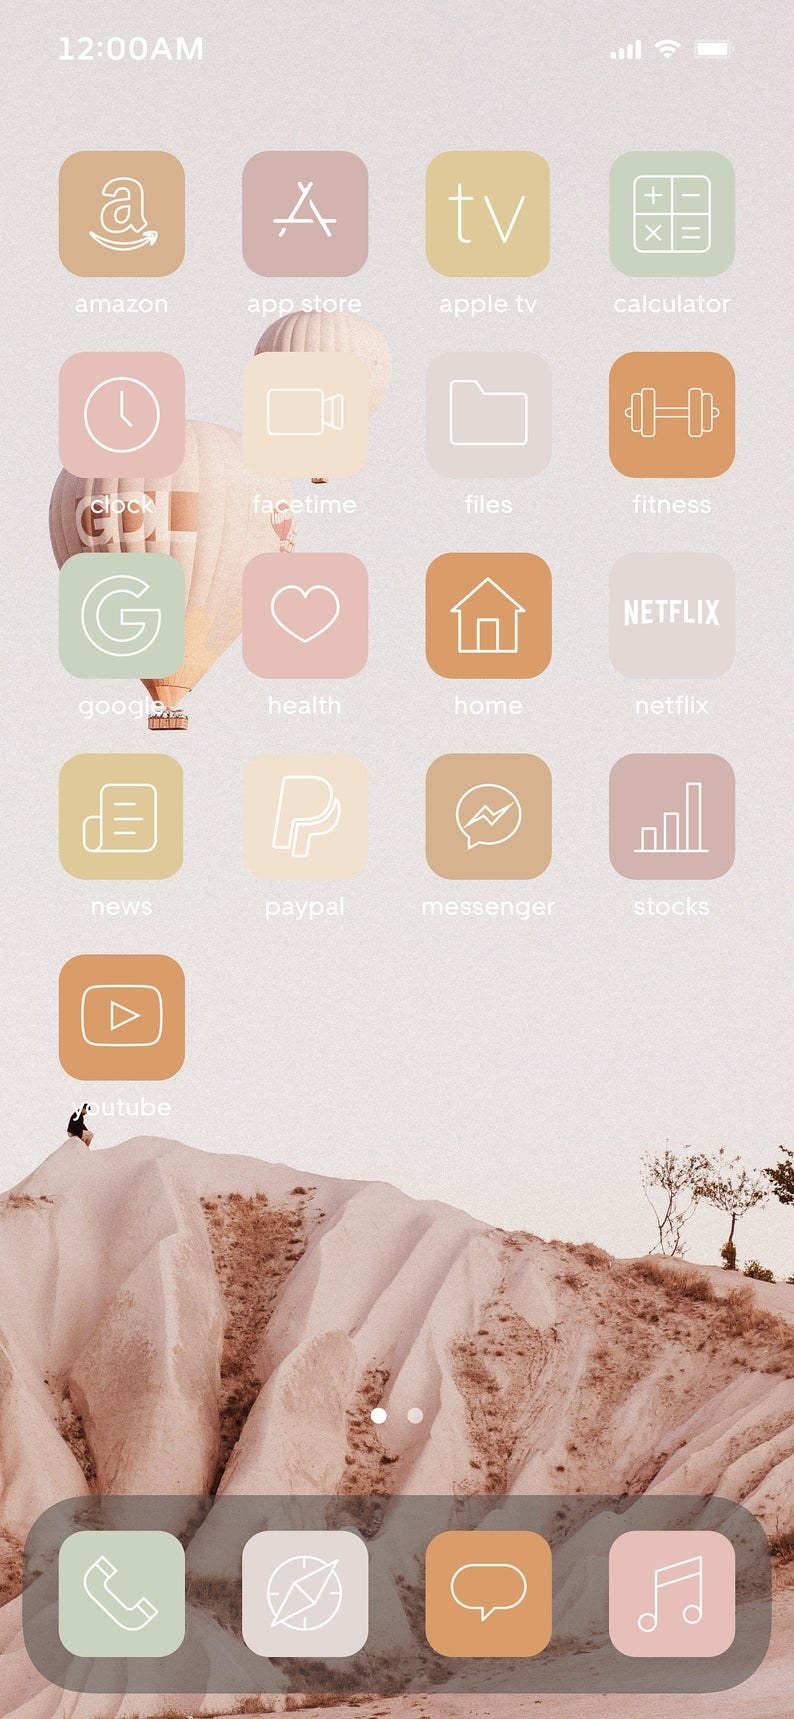 shortcut icons aesthetic